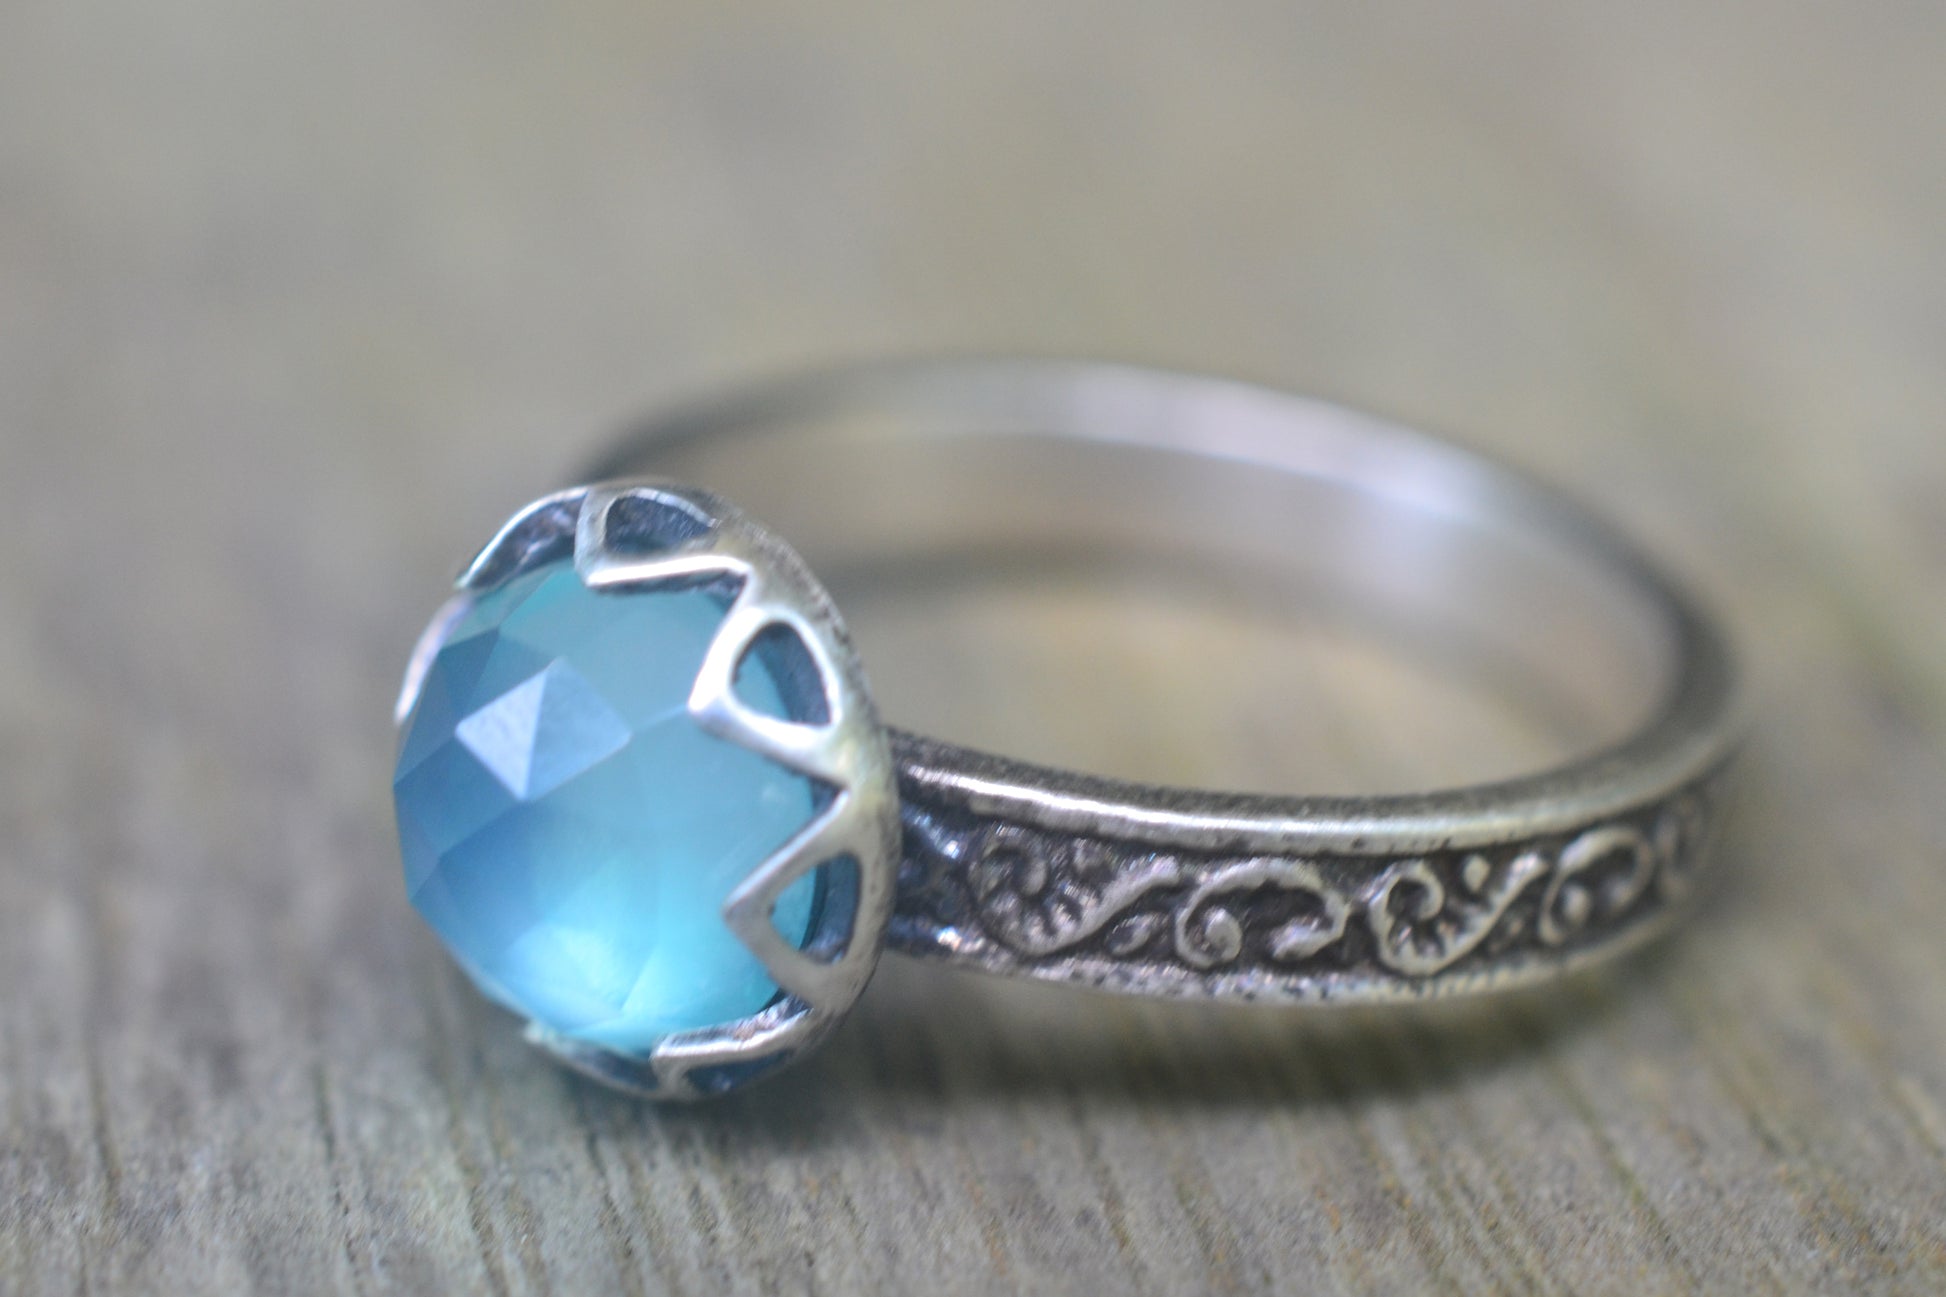 Peruvian Blue Opal Engagement Ring in Silver